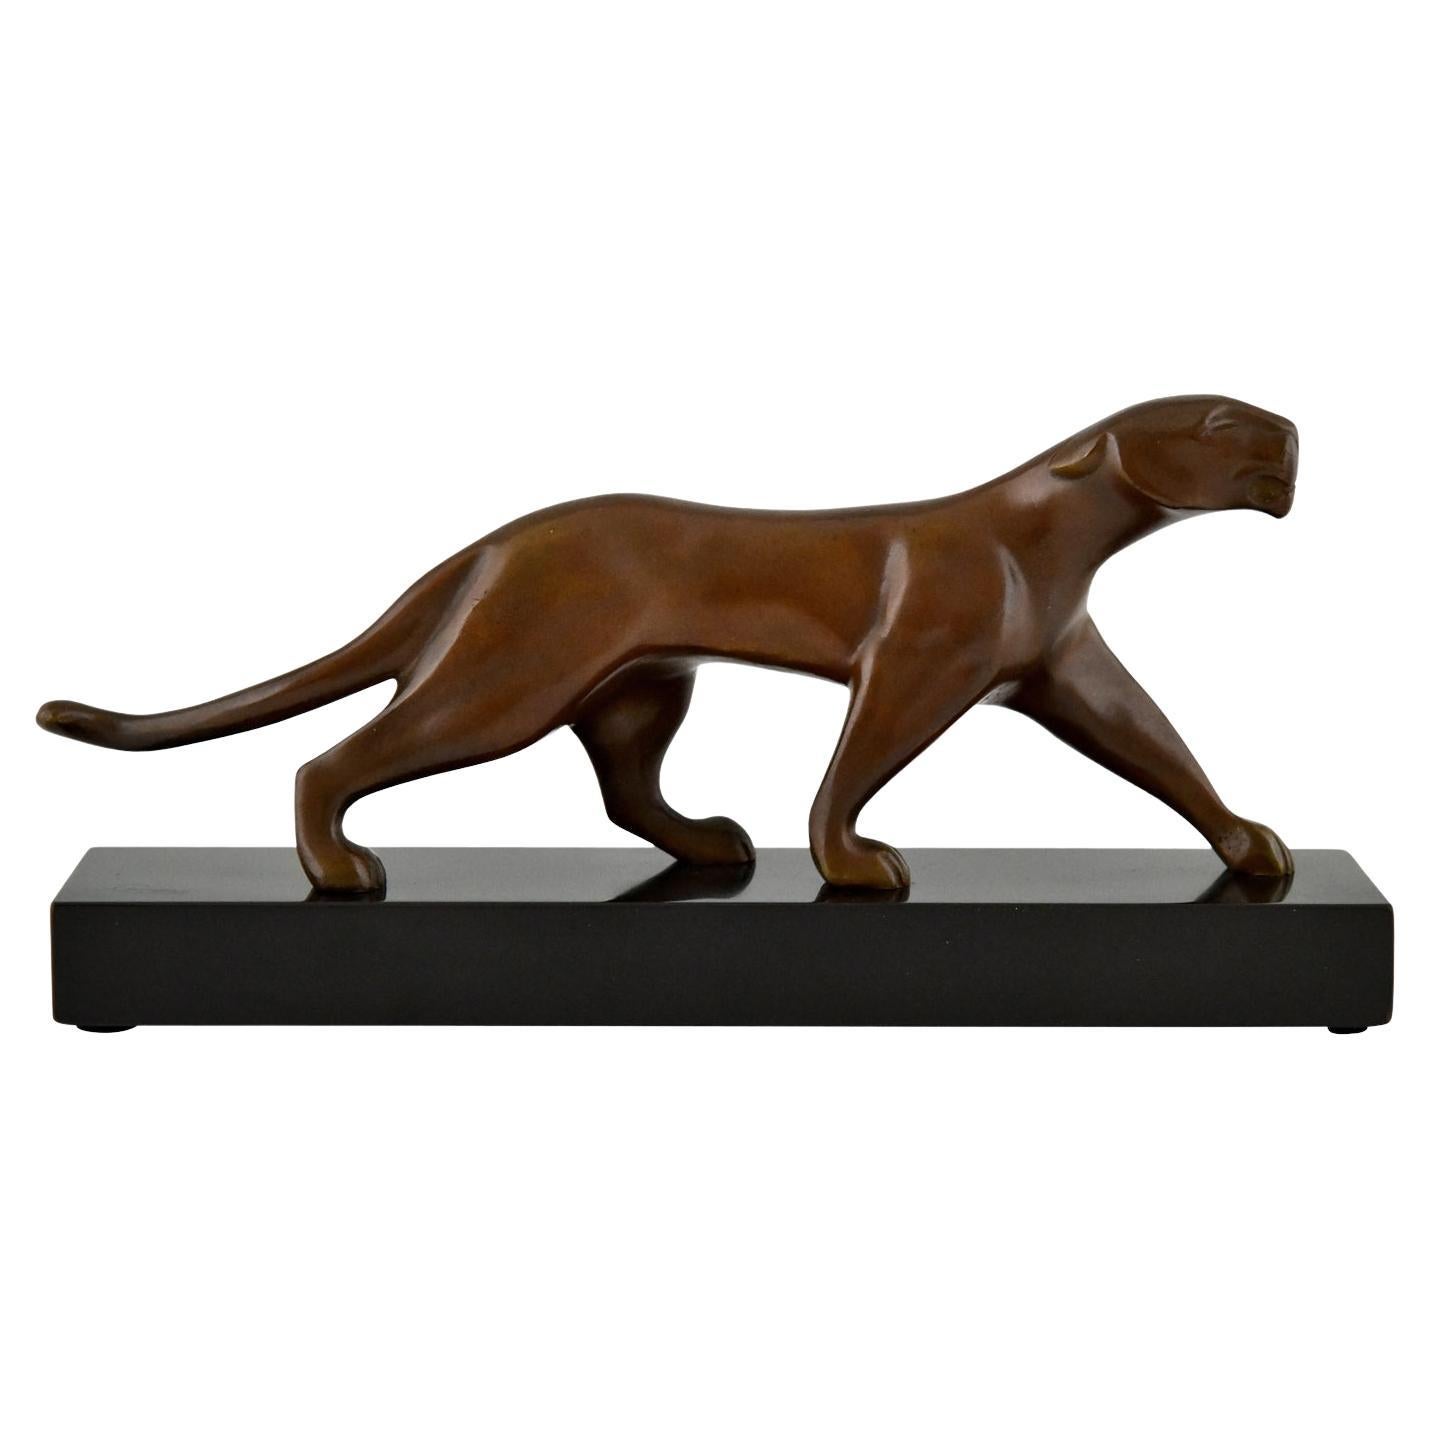 Art Deco Bronze Sculpture of a Panther Signed by Michel Decoux, 1930